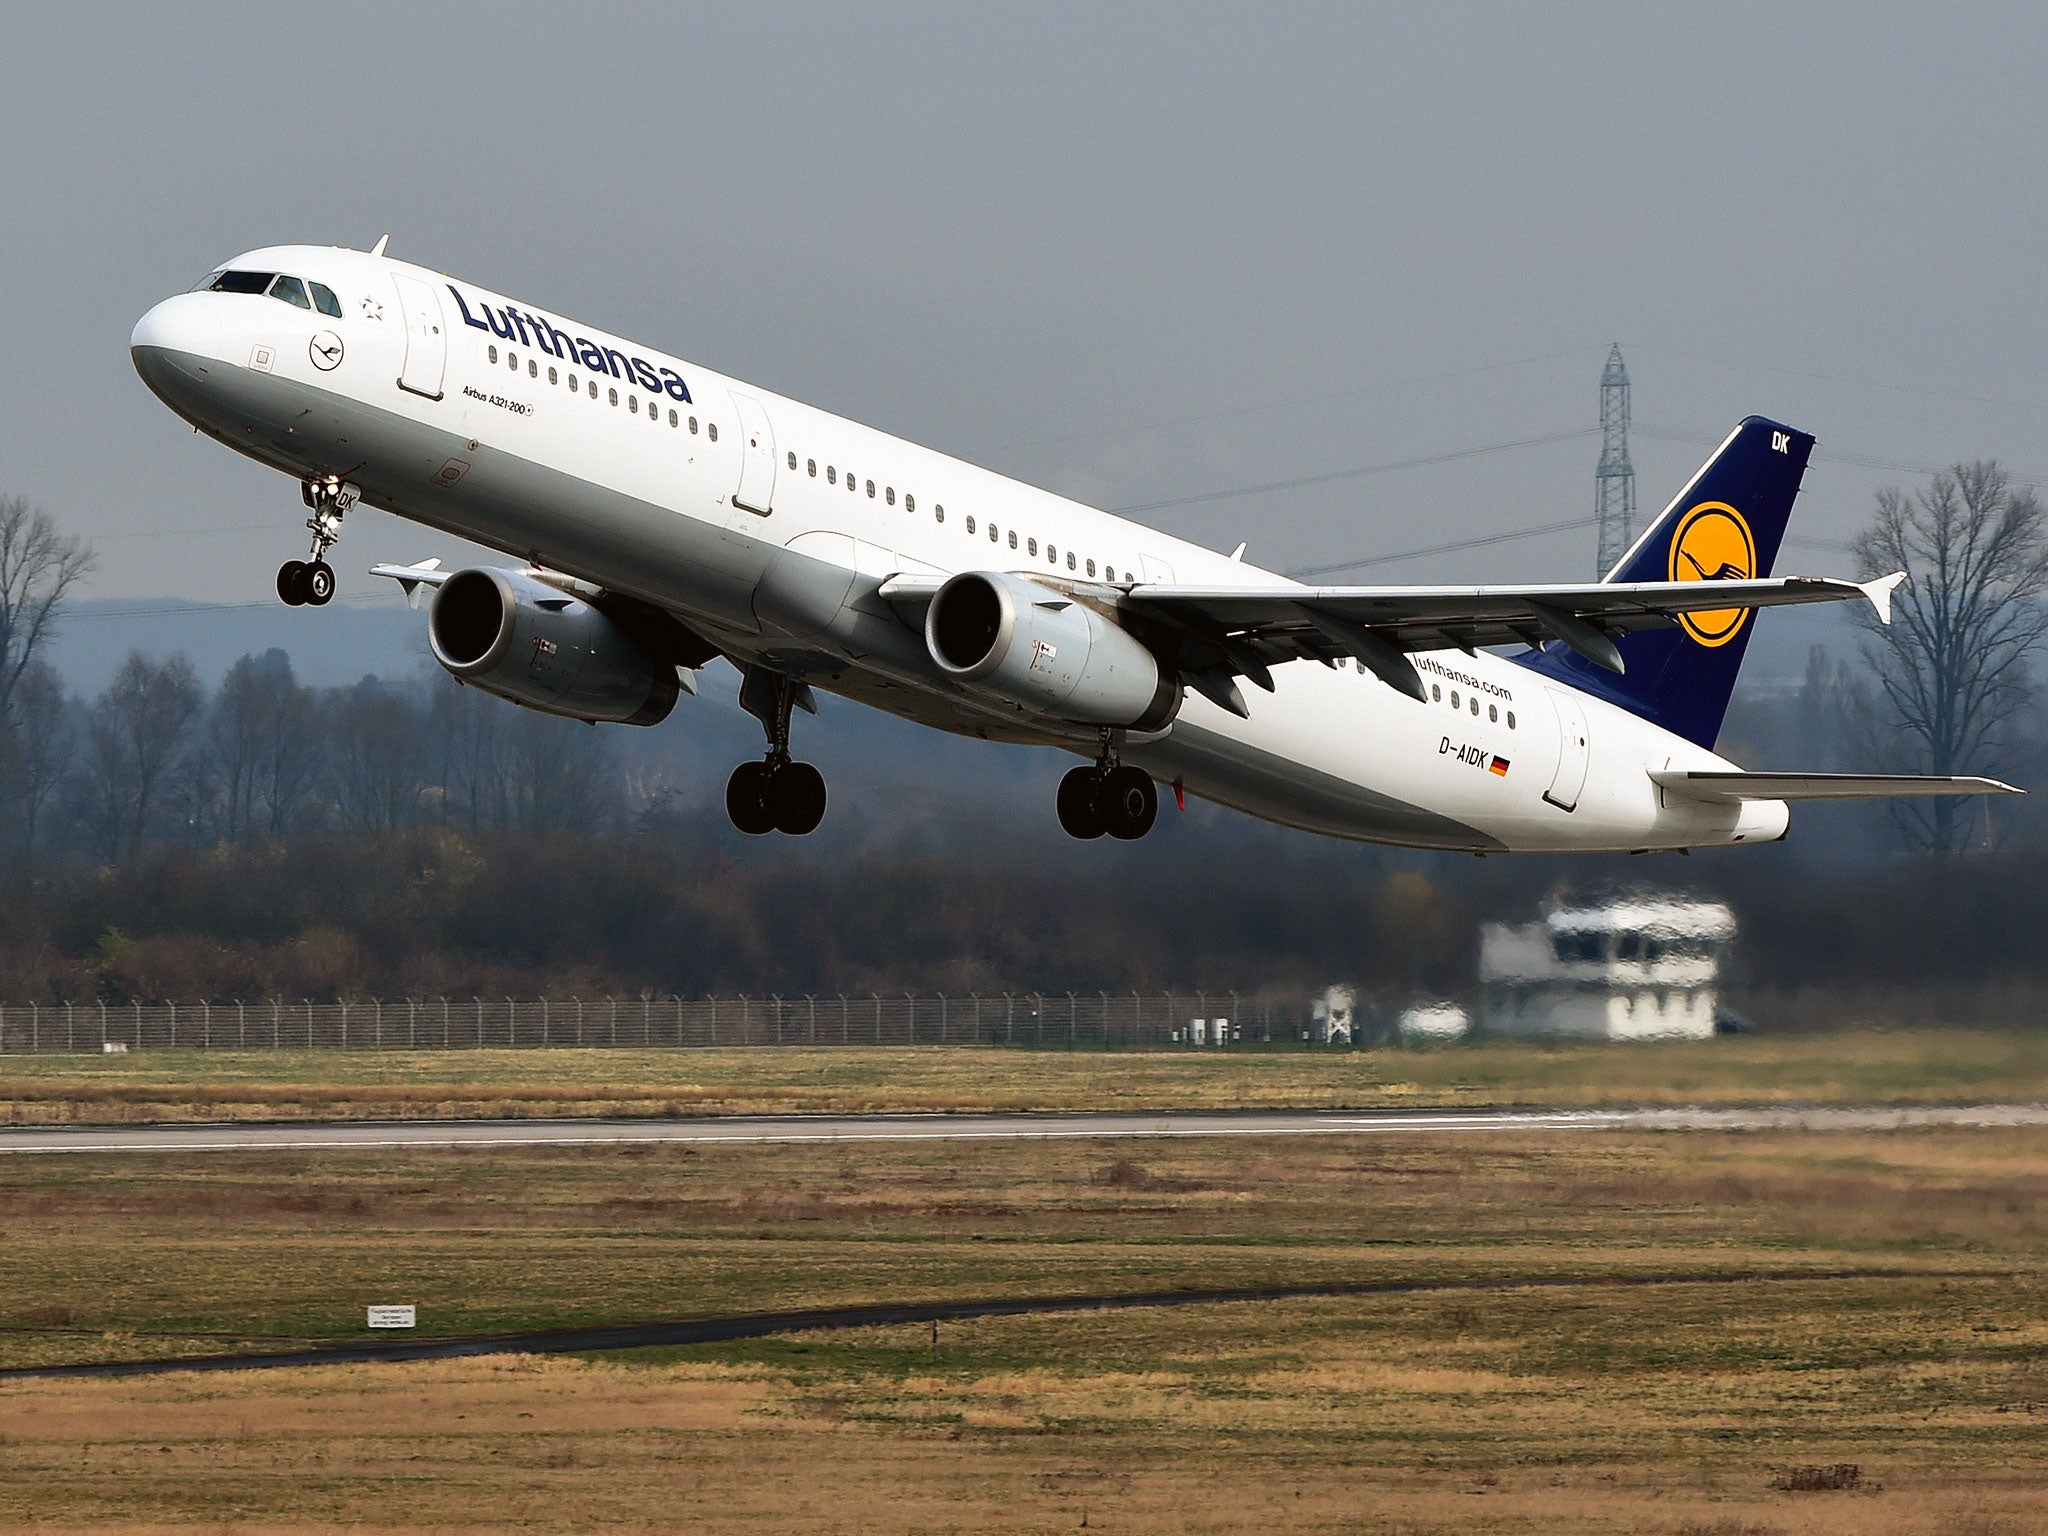 An Airbus plane of German airline Lufthansa carrying onboard relatives of the Germanwings plane crash victims takes off from the Duesseldorf airport in Duesseldorf, western Germany, en route to Marseille